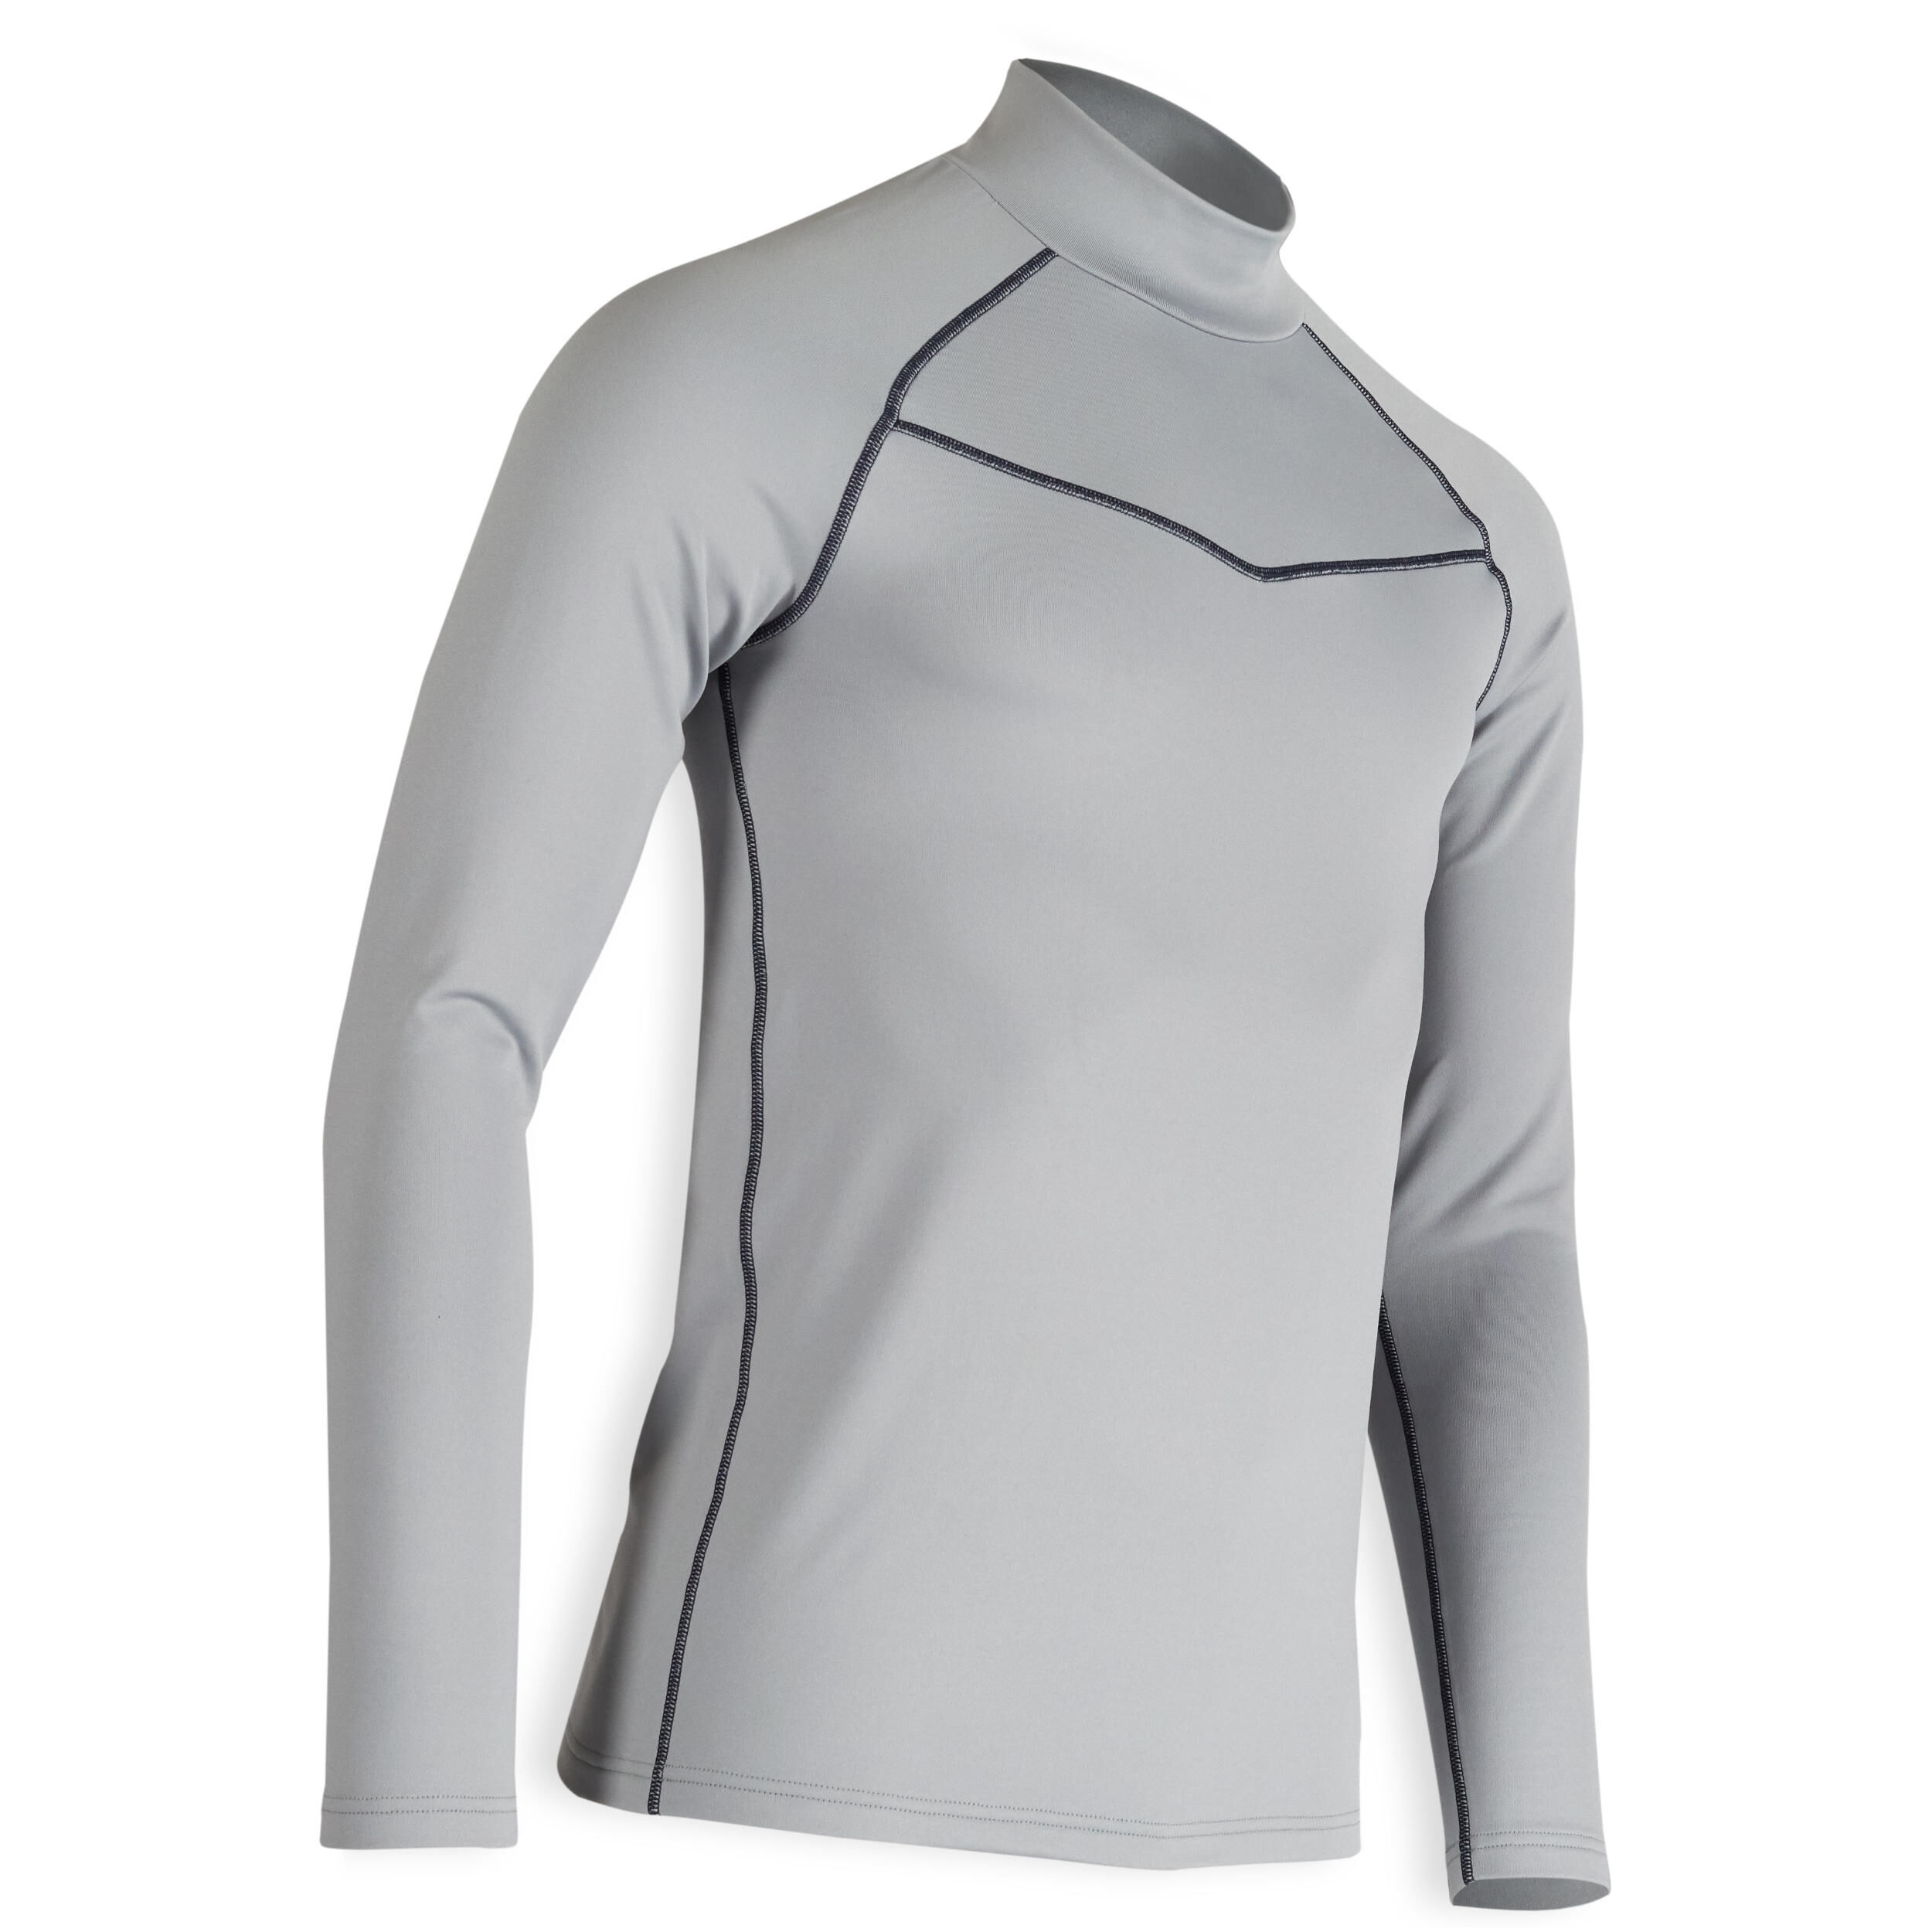 INESIS MEN'S GOLF COLD WEATHER BASE LAYER - GREY